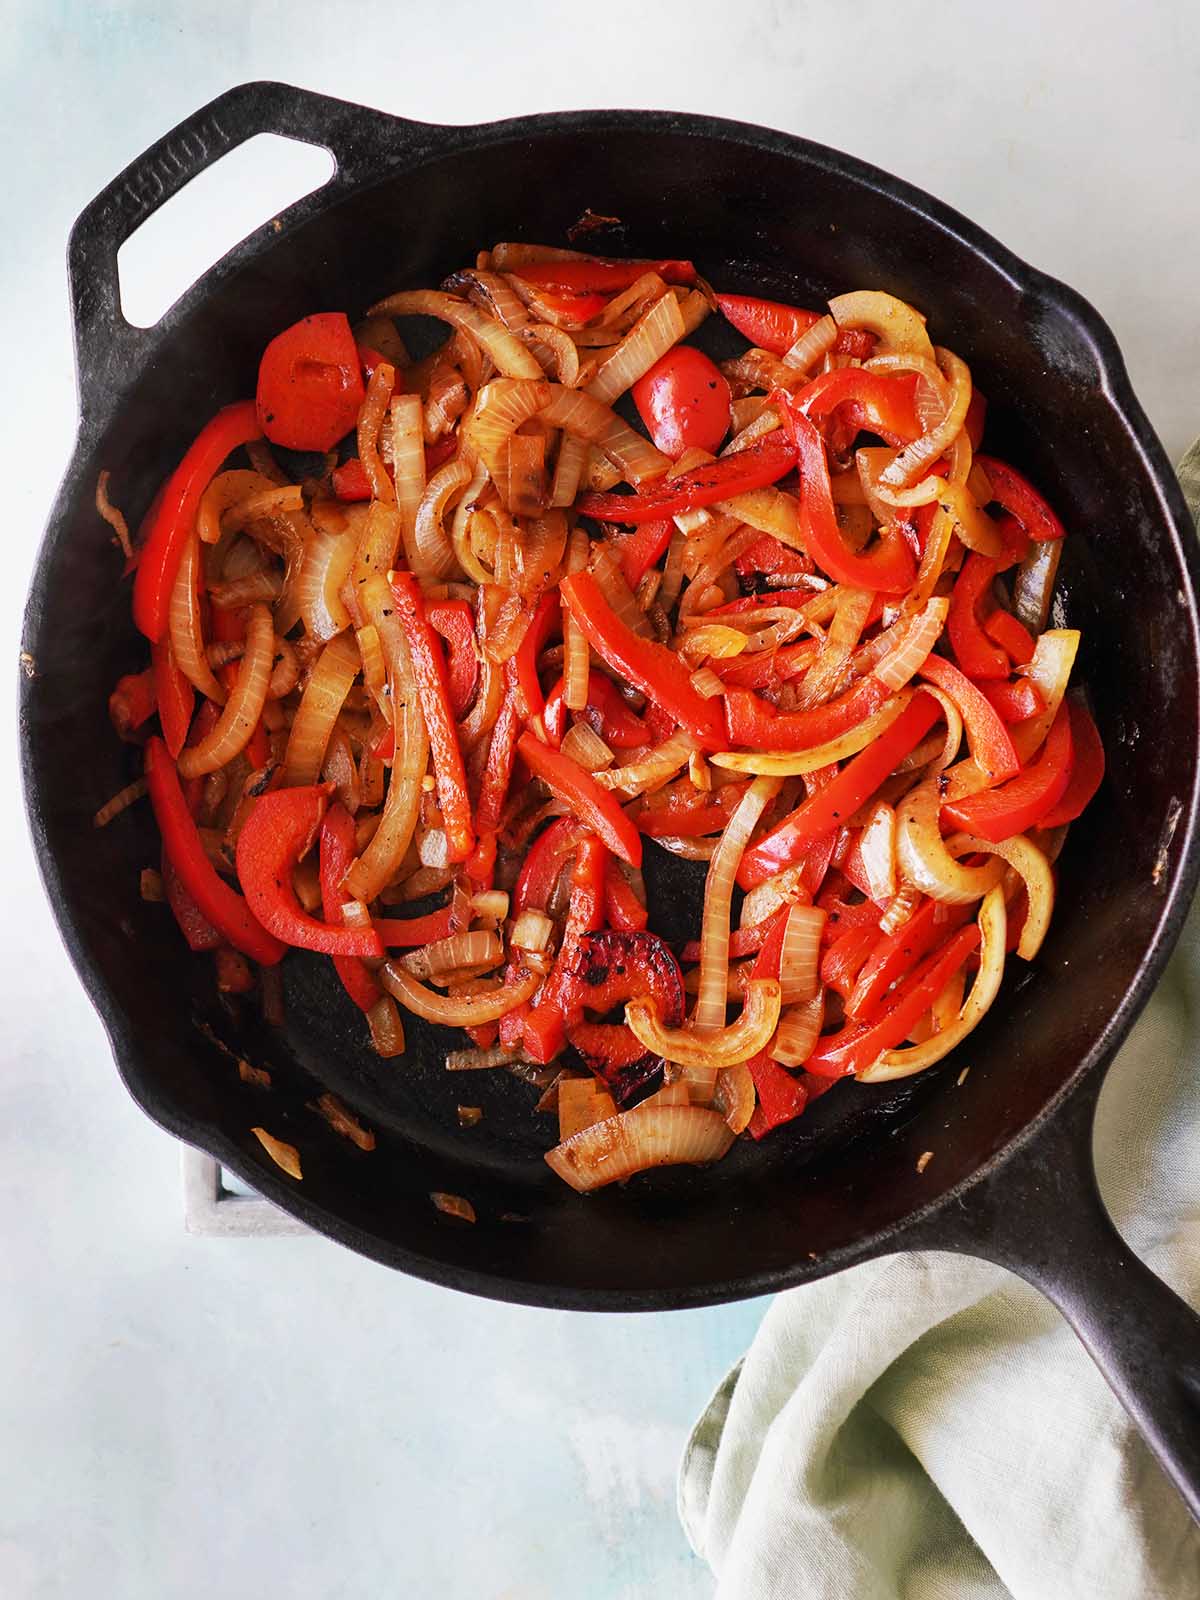 An iron skillet with sauteed onions and red bell peppers.